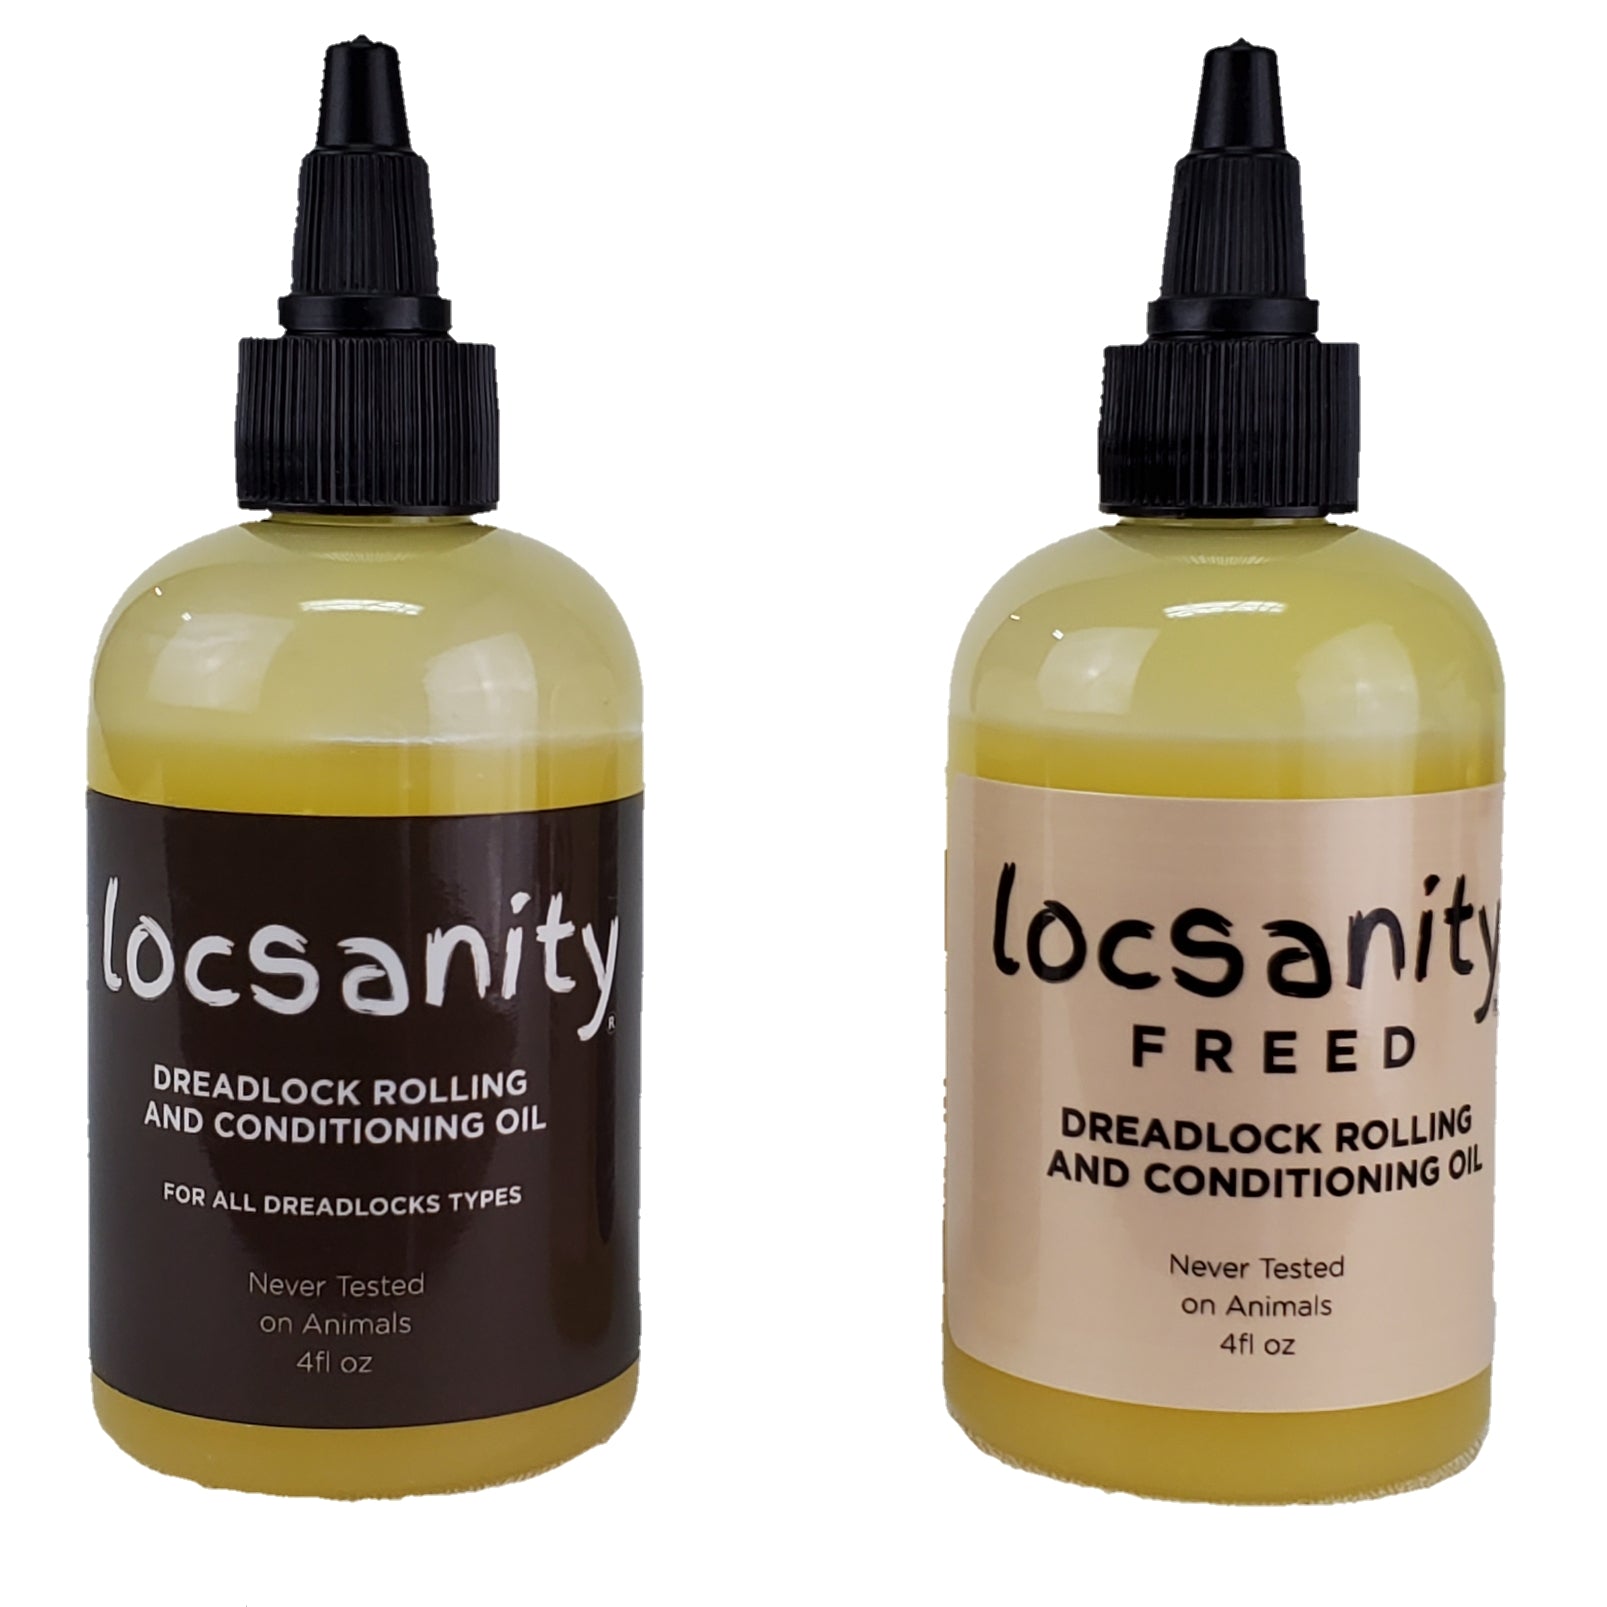 Locsanity Dreadlock Rolling And Conditioning Oil